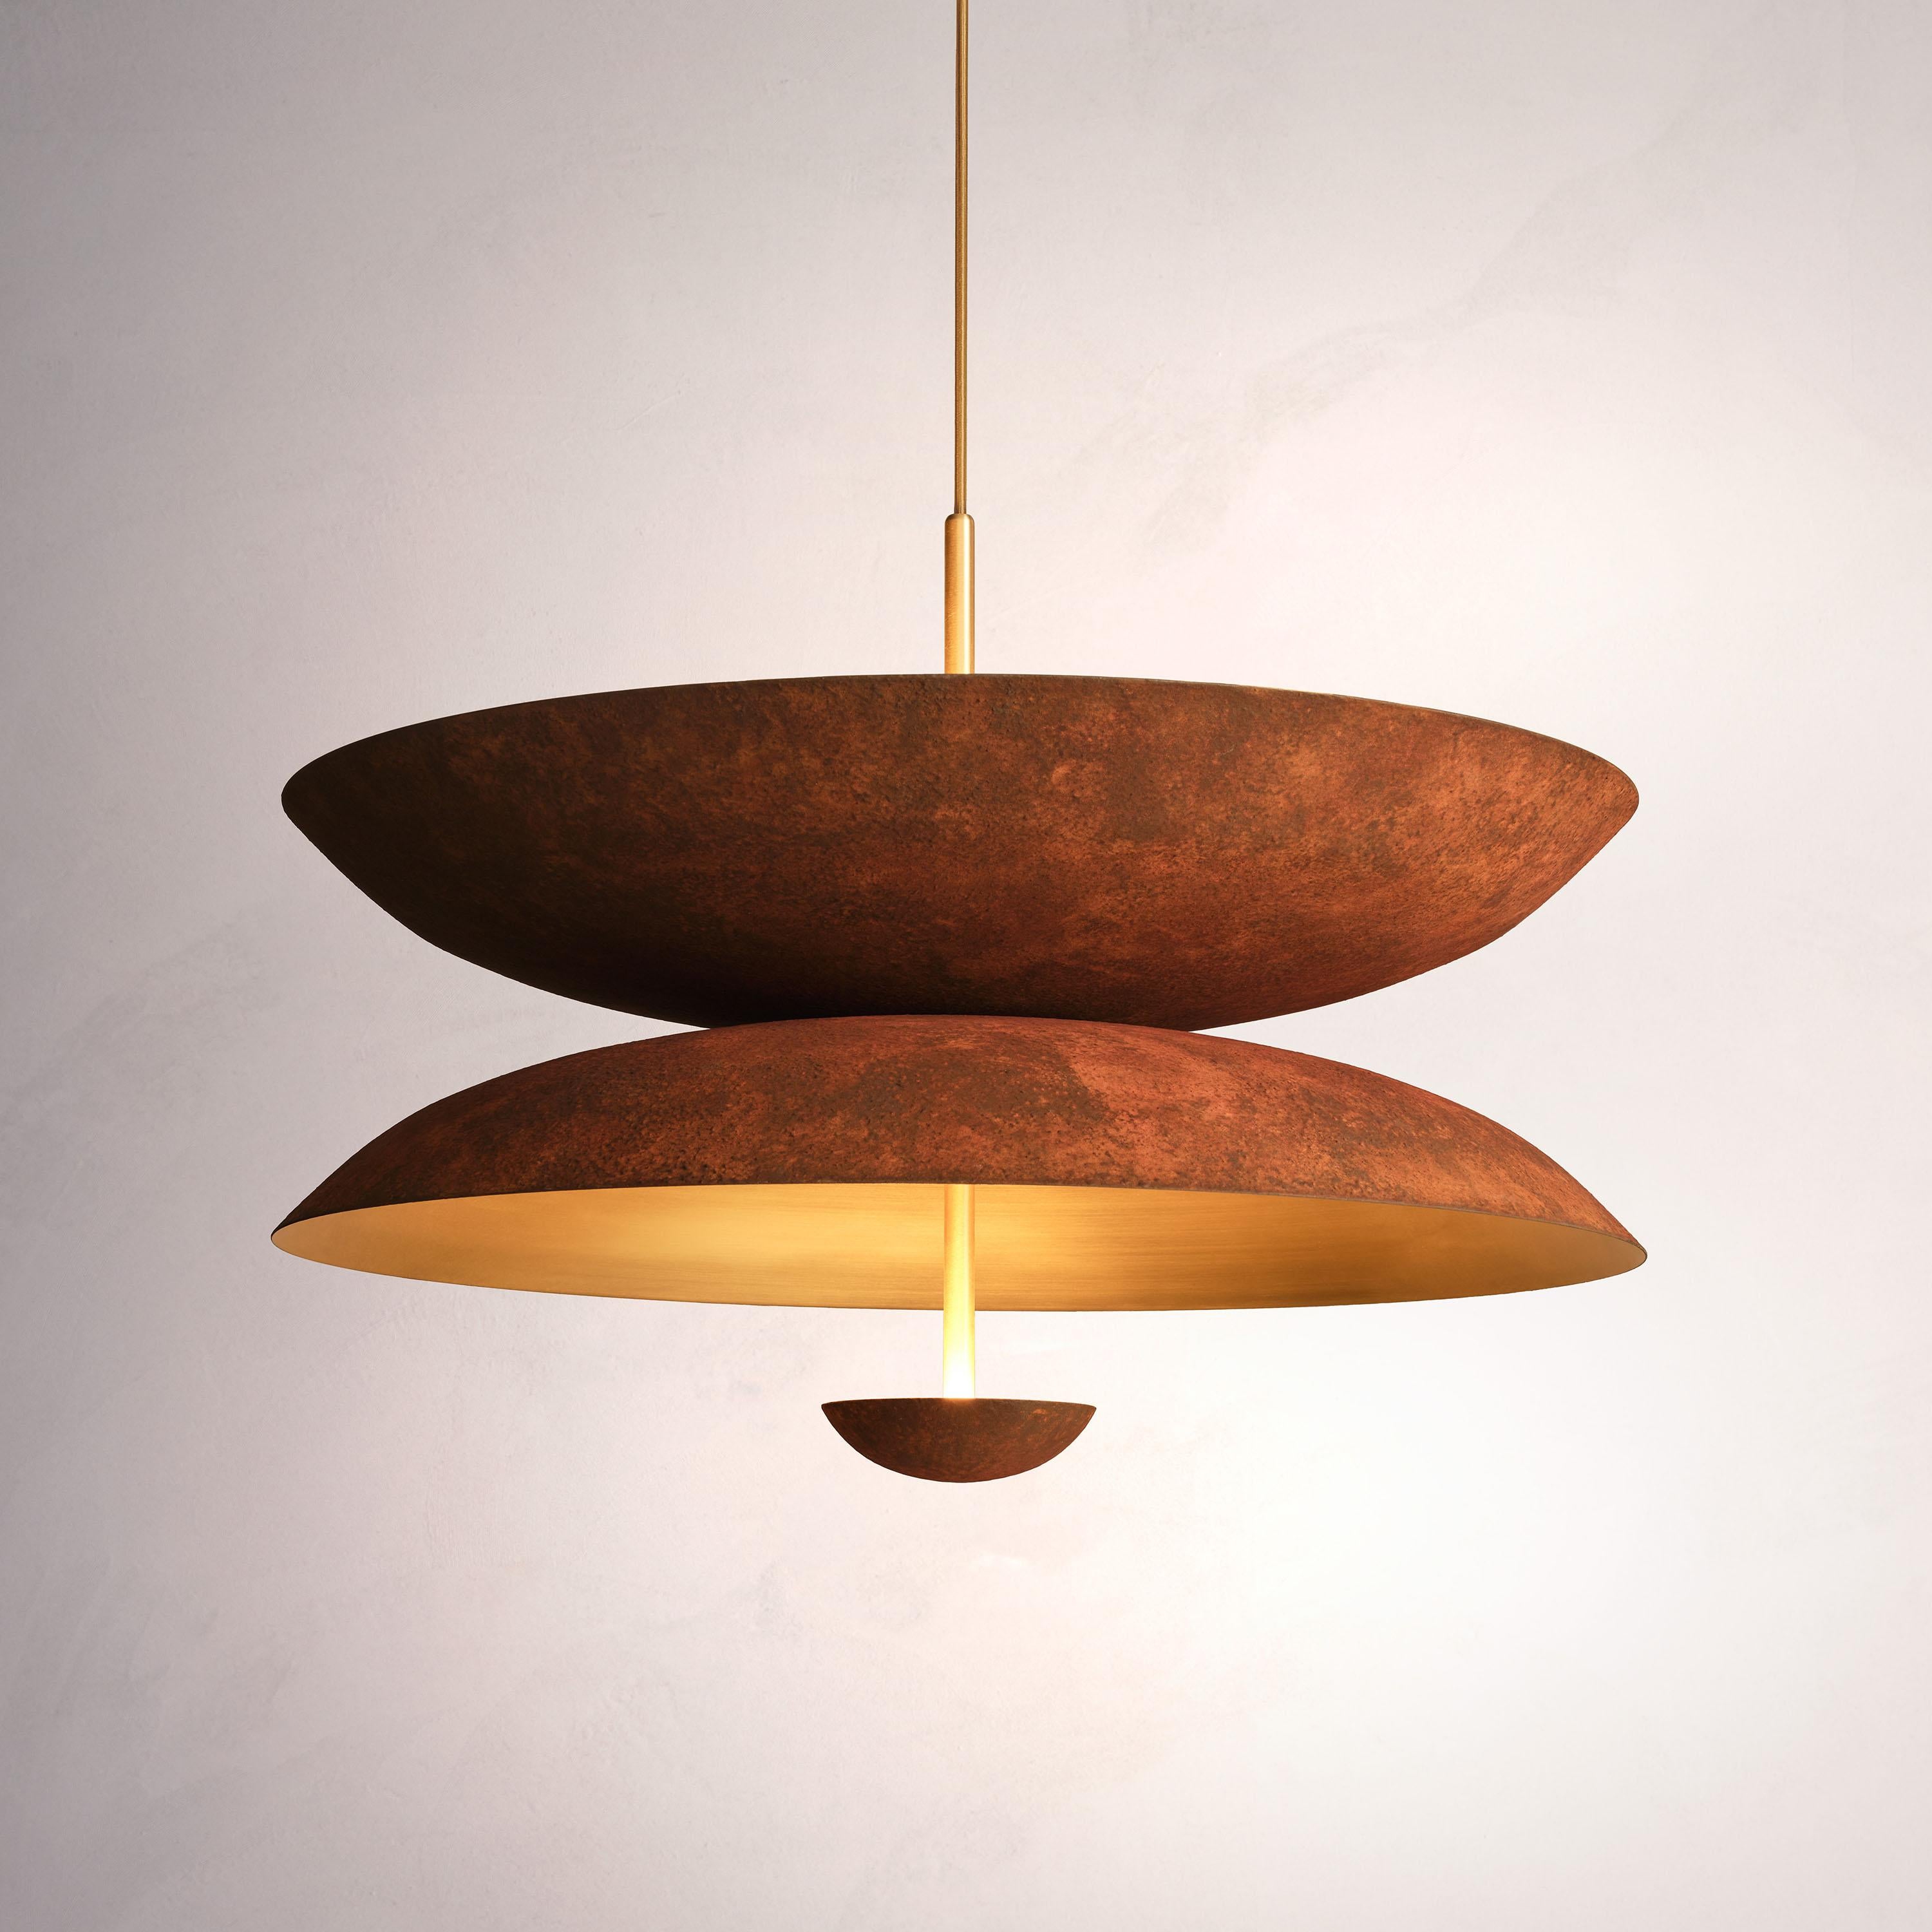 Inspired by planet-like shapes and textures, the Cosmic collection plays with both metal properties and a selection of patina finishes.
 
The Pendant Duo Rust is composed of three carefully hand-spun brass plates and preserves the beautiful texture